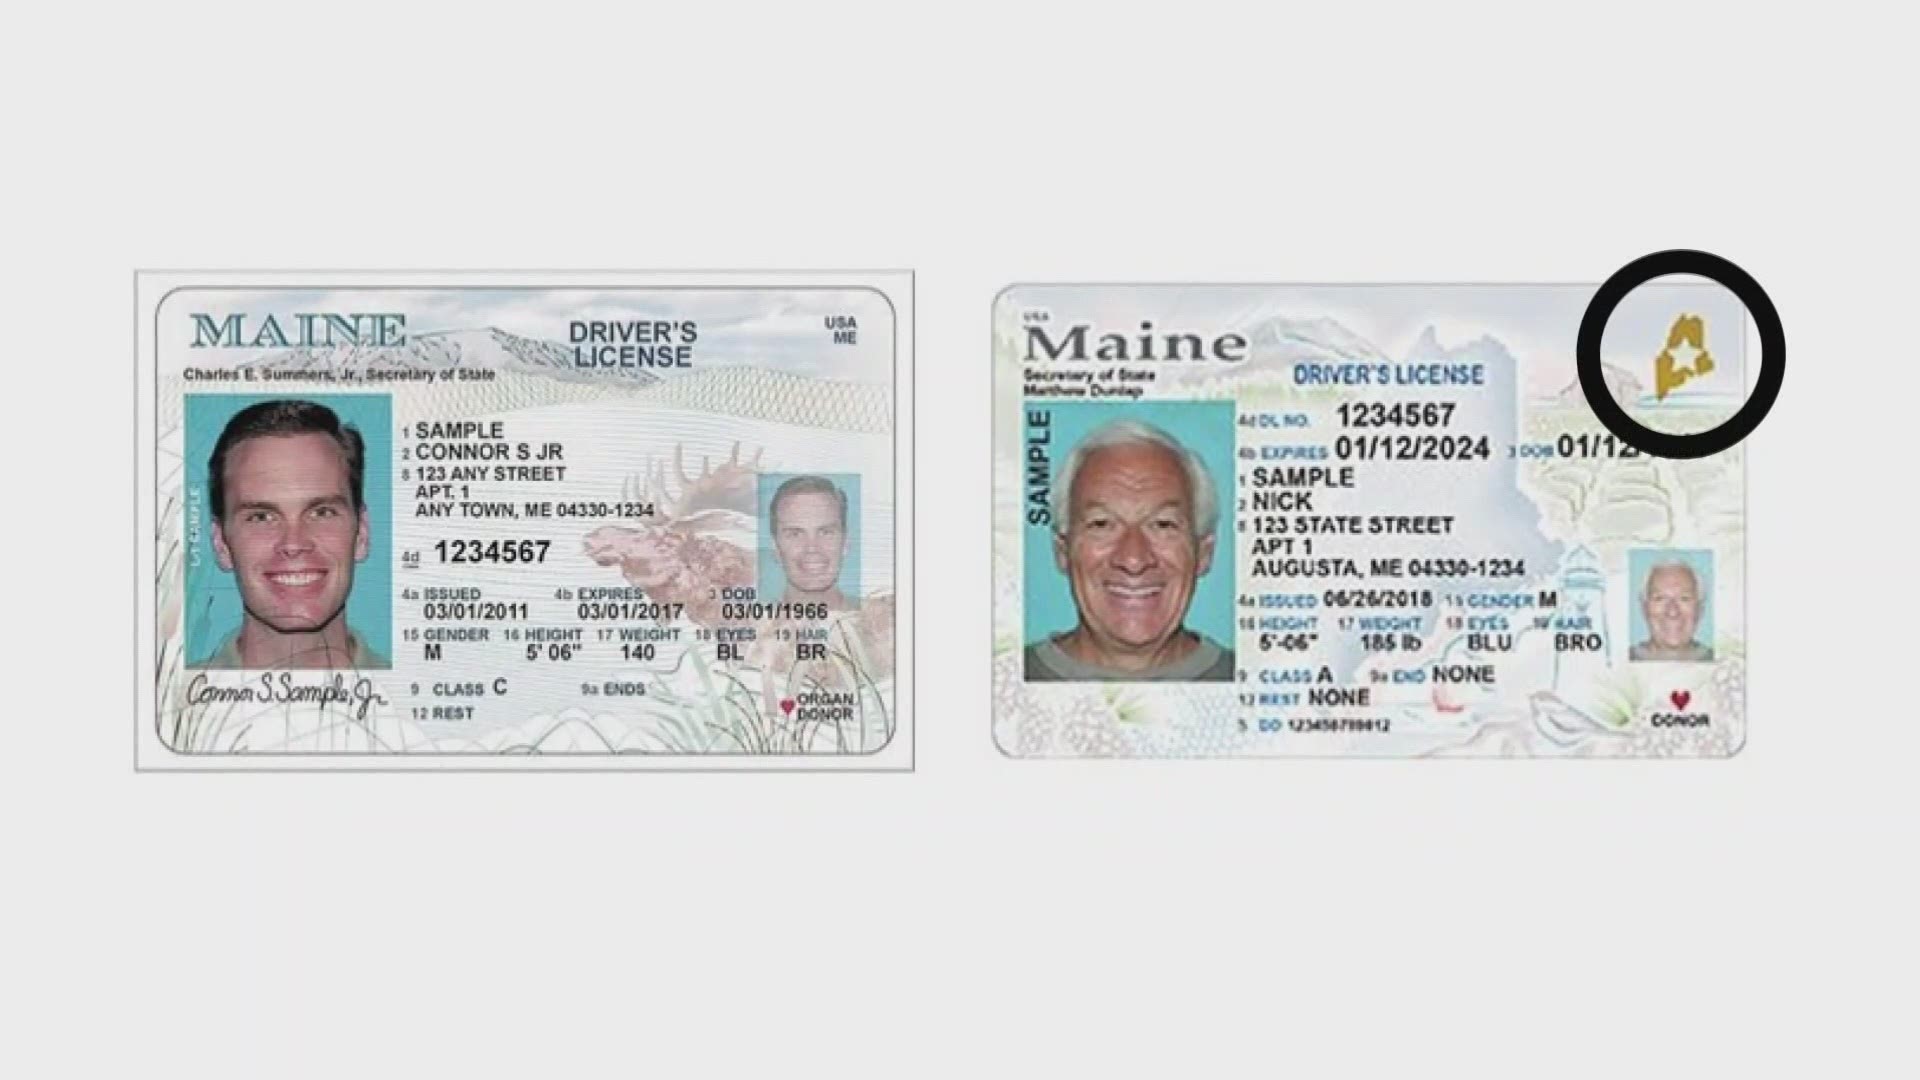 Getting a real ID is optional but if you don't have one come October, your driver's license will no longer be sufficient for identification when boarding a plane.